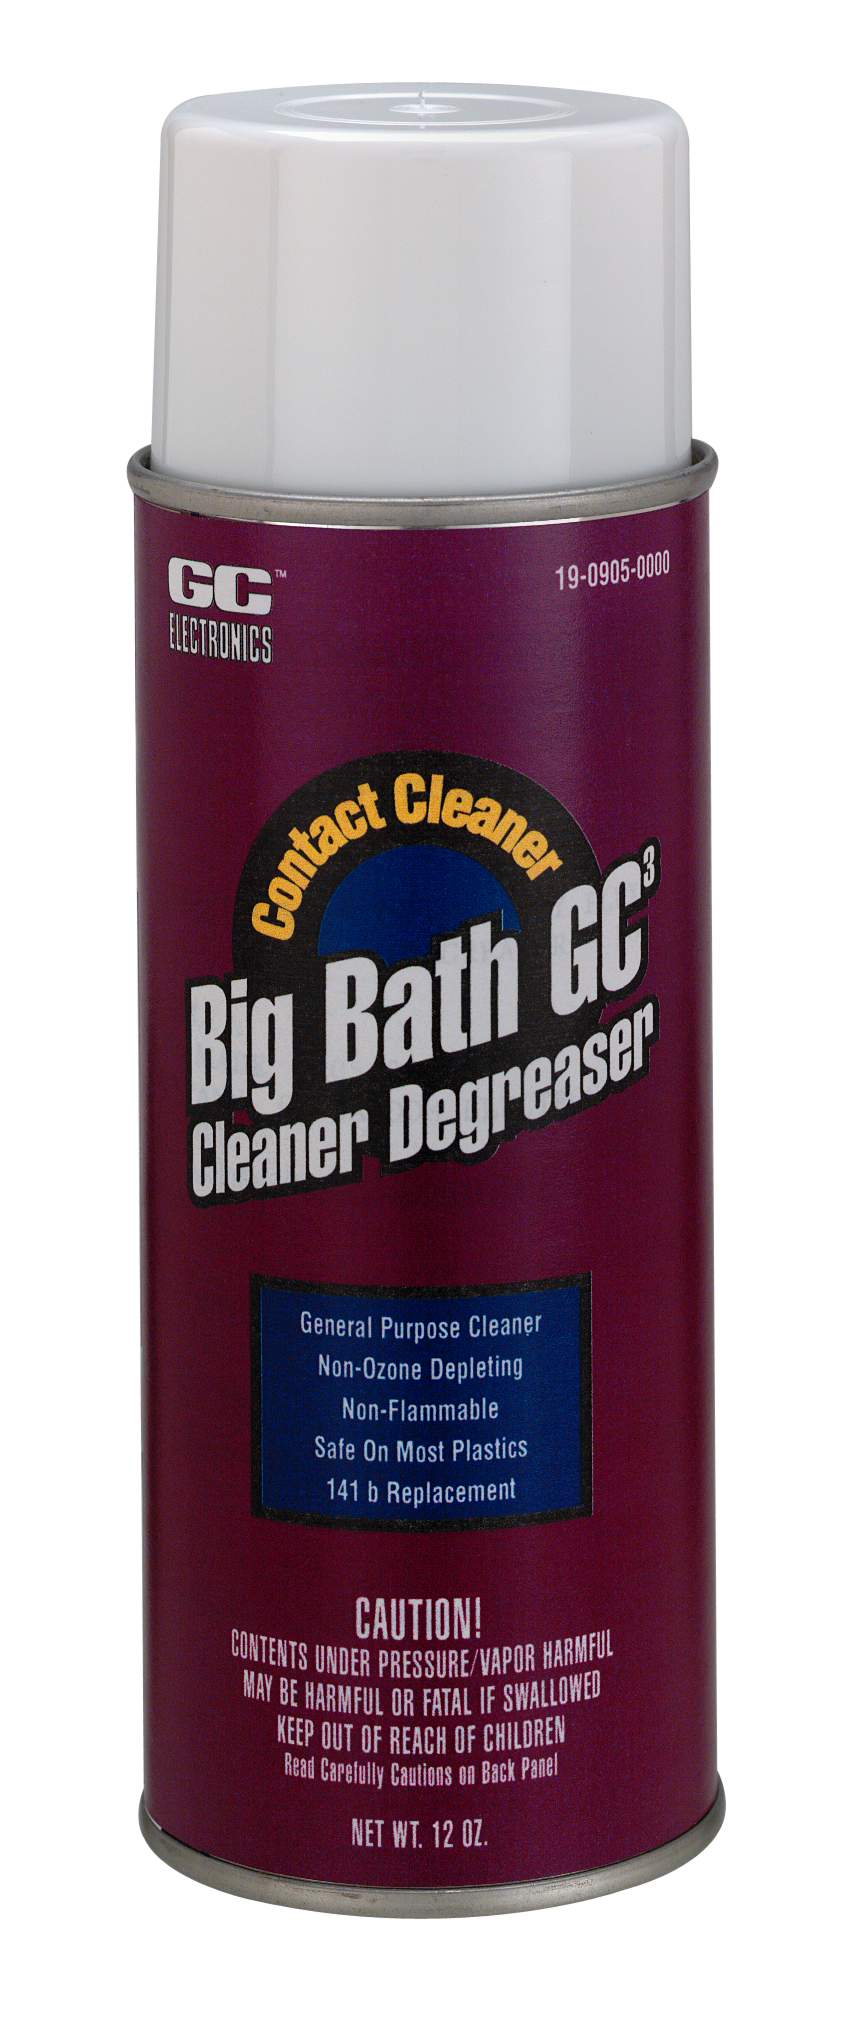 GC Electronics, GC Electronics 19-905, Big Bath cleaner degreaser / contact cleaner, 12 oz. aerosol can